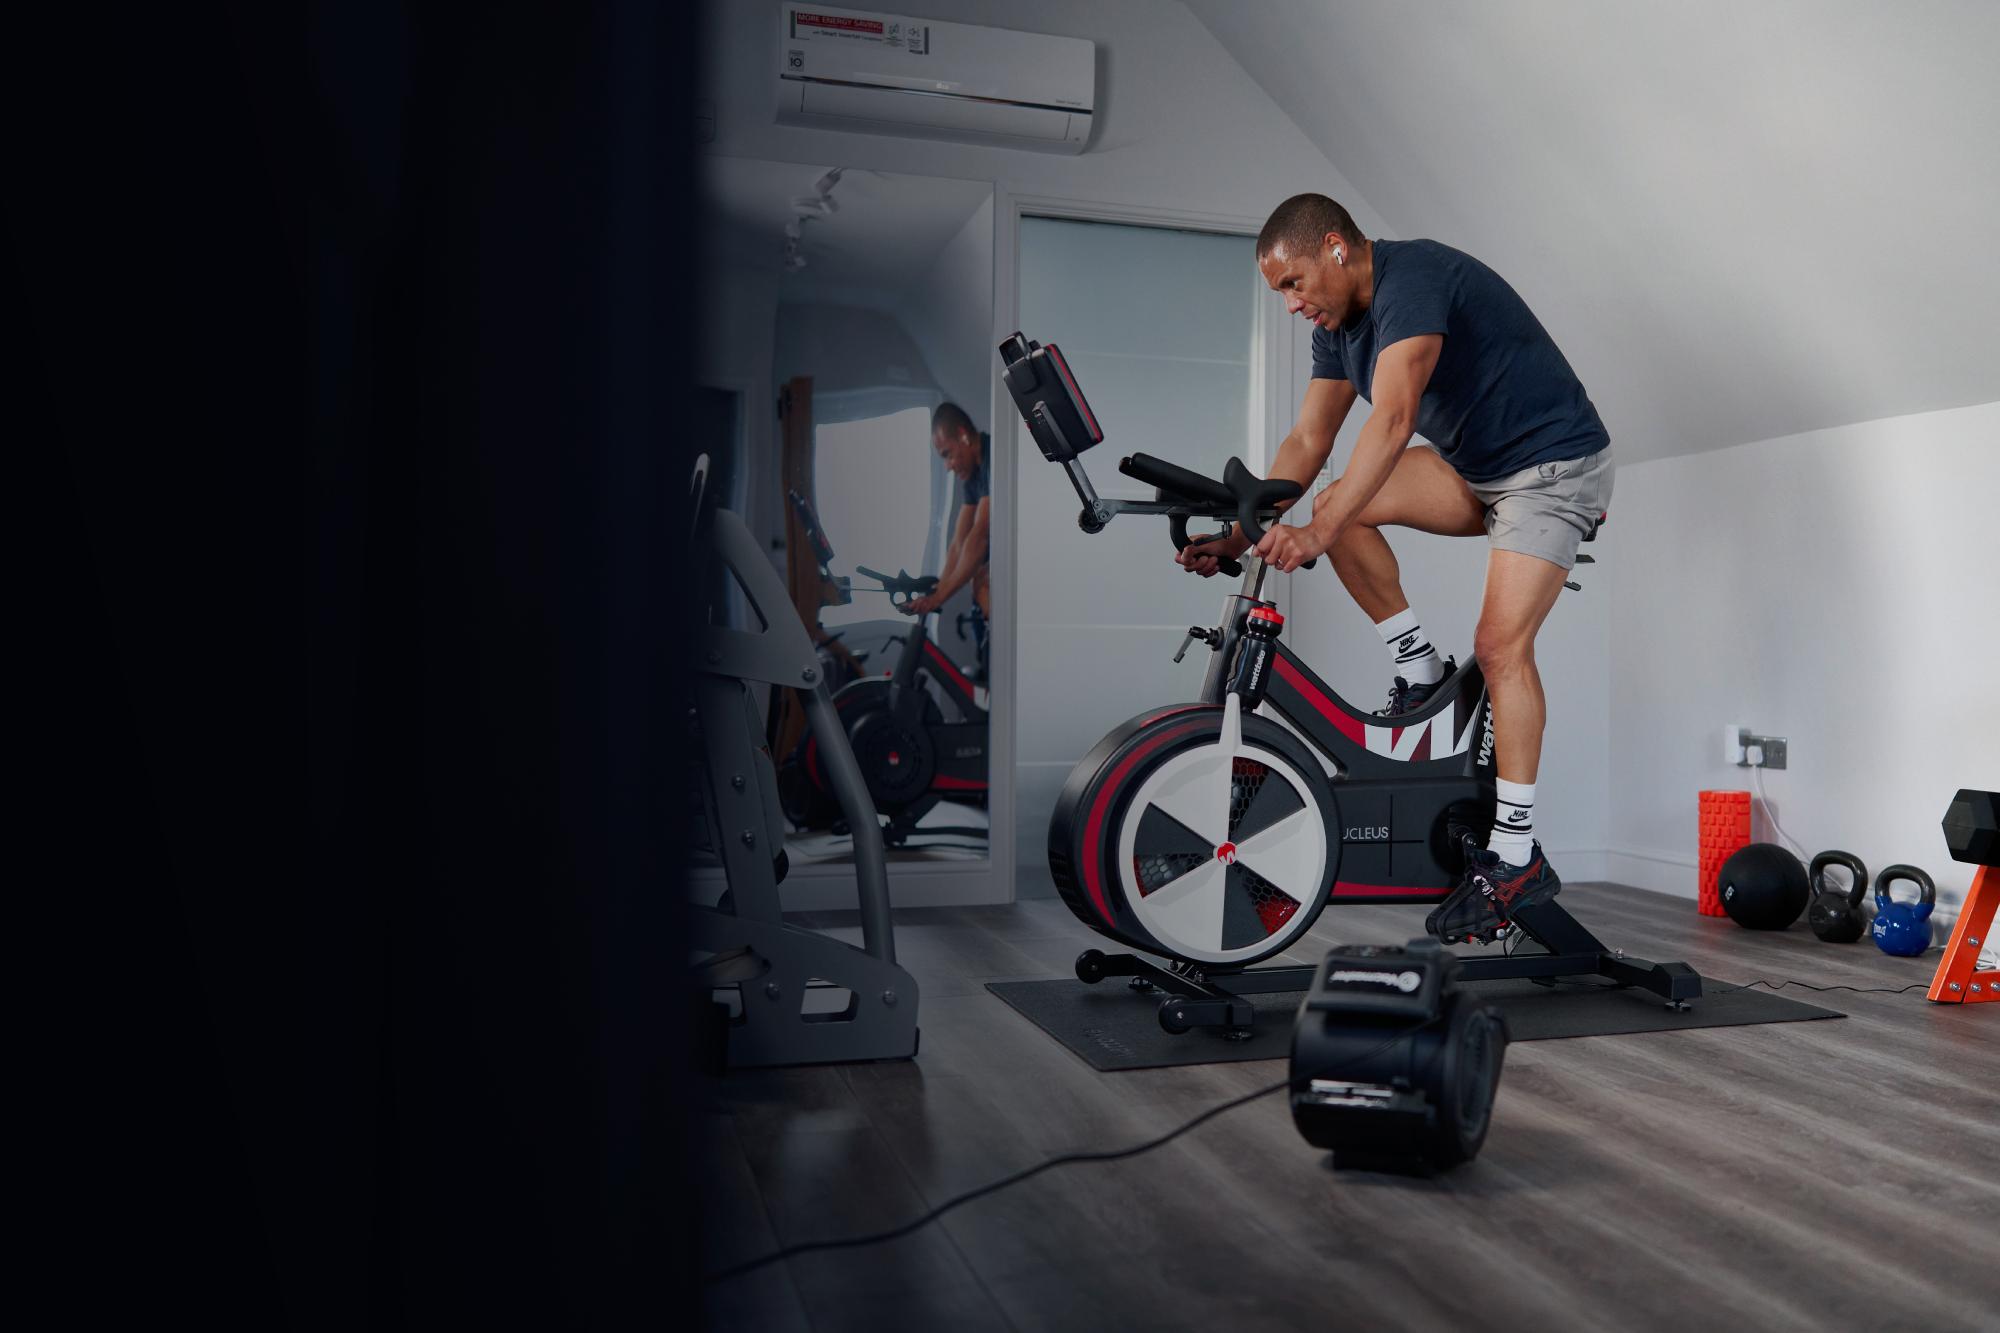 Wattbike Nucleus being used in a home gym